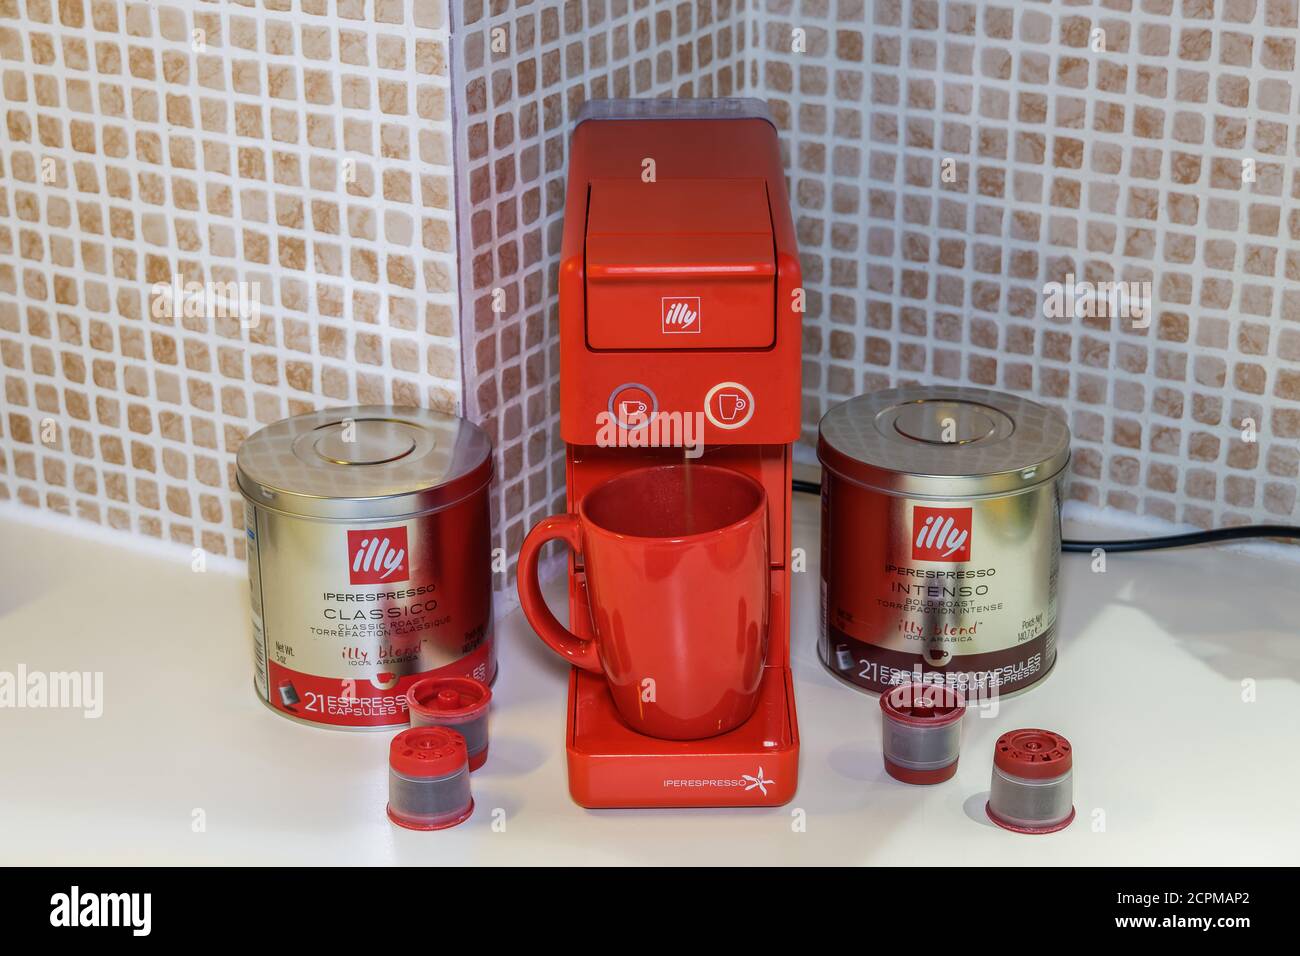 Automatic Illy iperespresso single-serve capsules, used to create